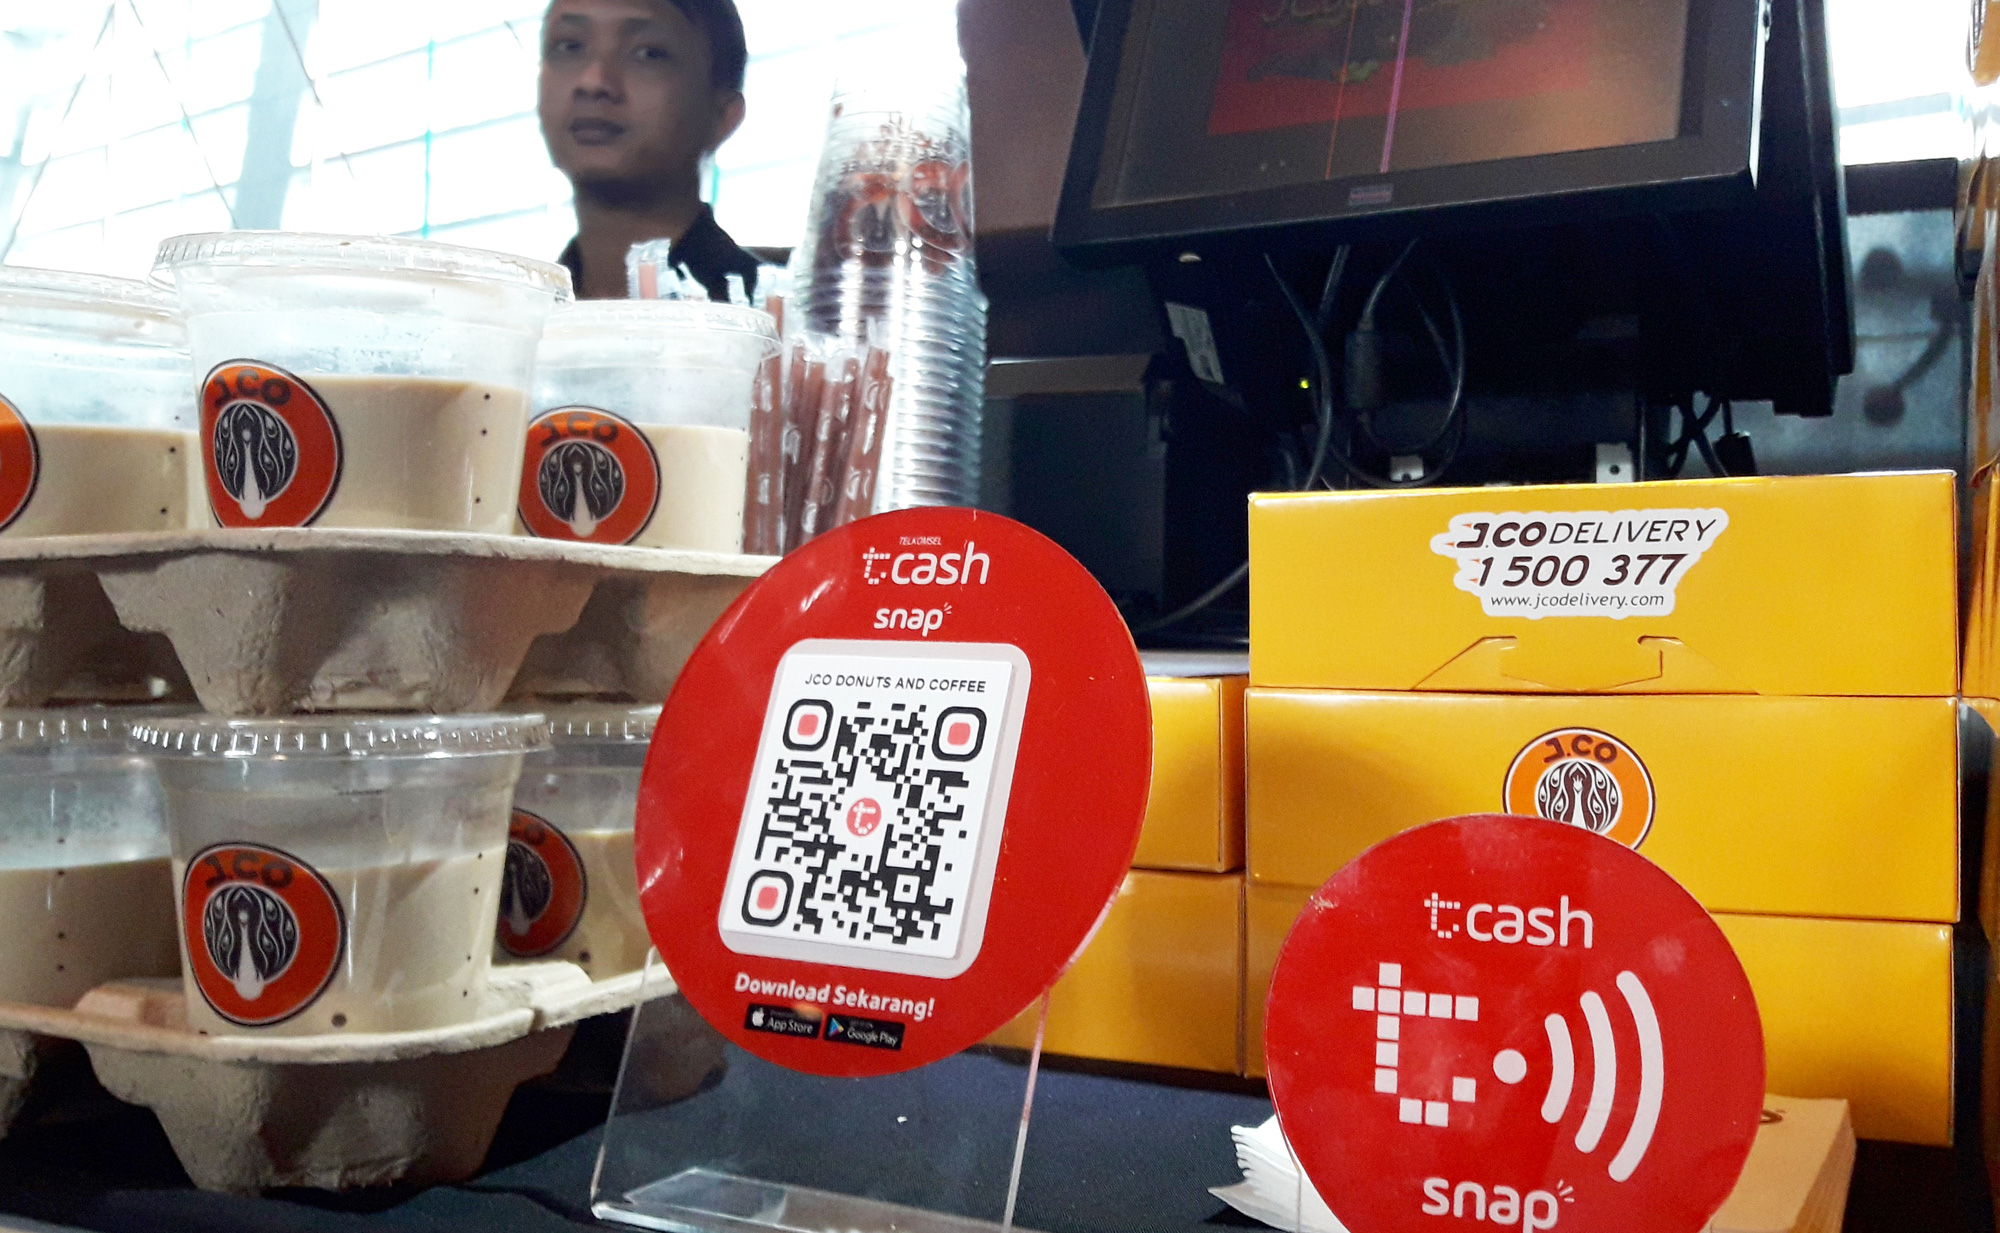 Indonesia is predicted to become the largest player in the e-wallet industry, and Buy Now Postpaid in Southeast Asia by 2025. Photo: @AFP.